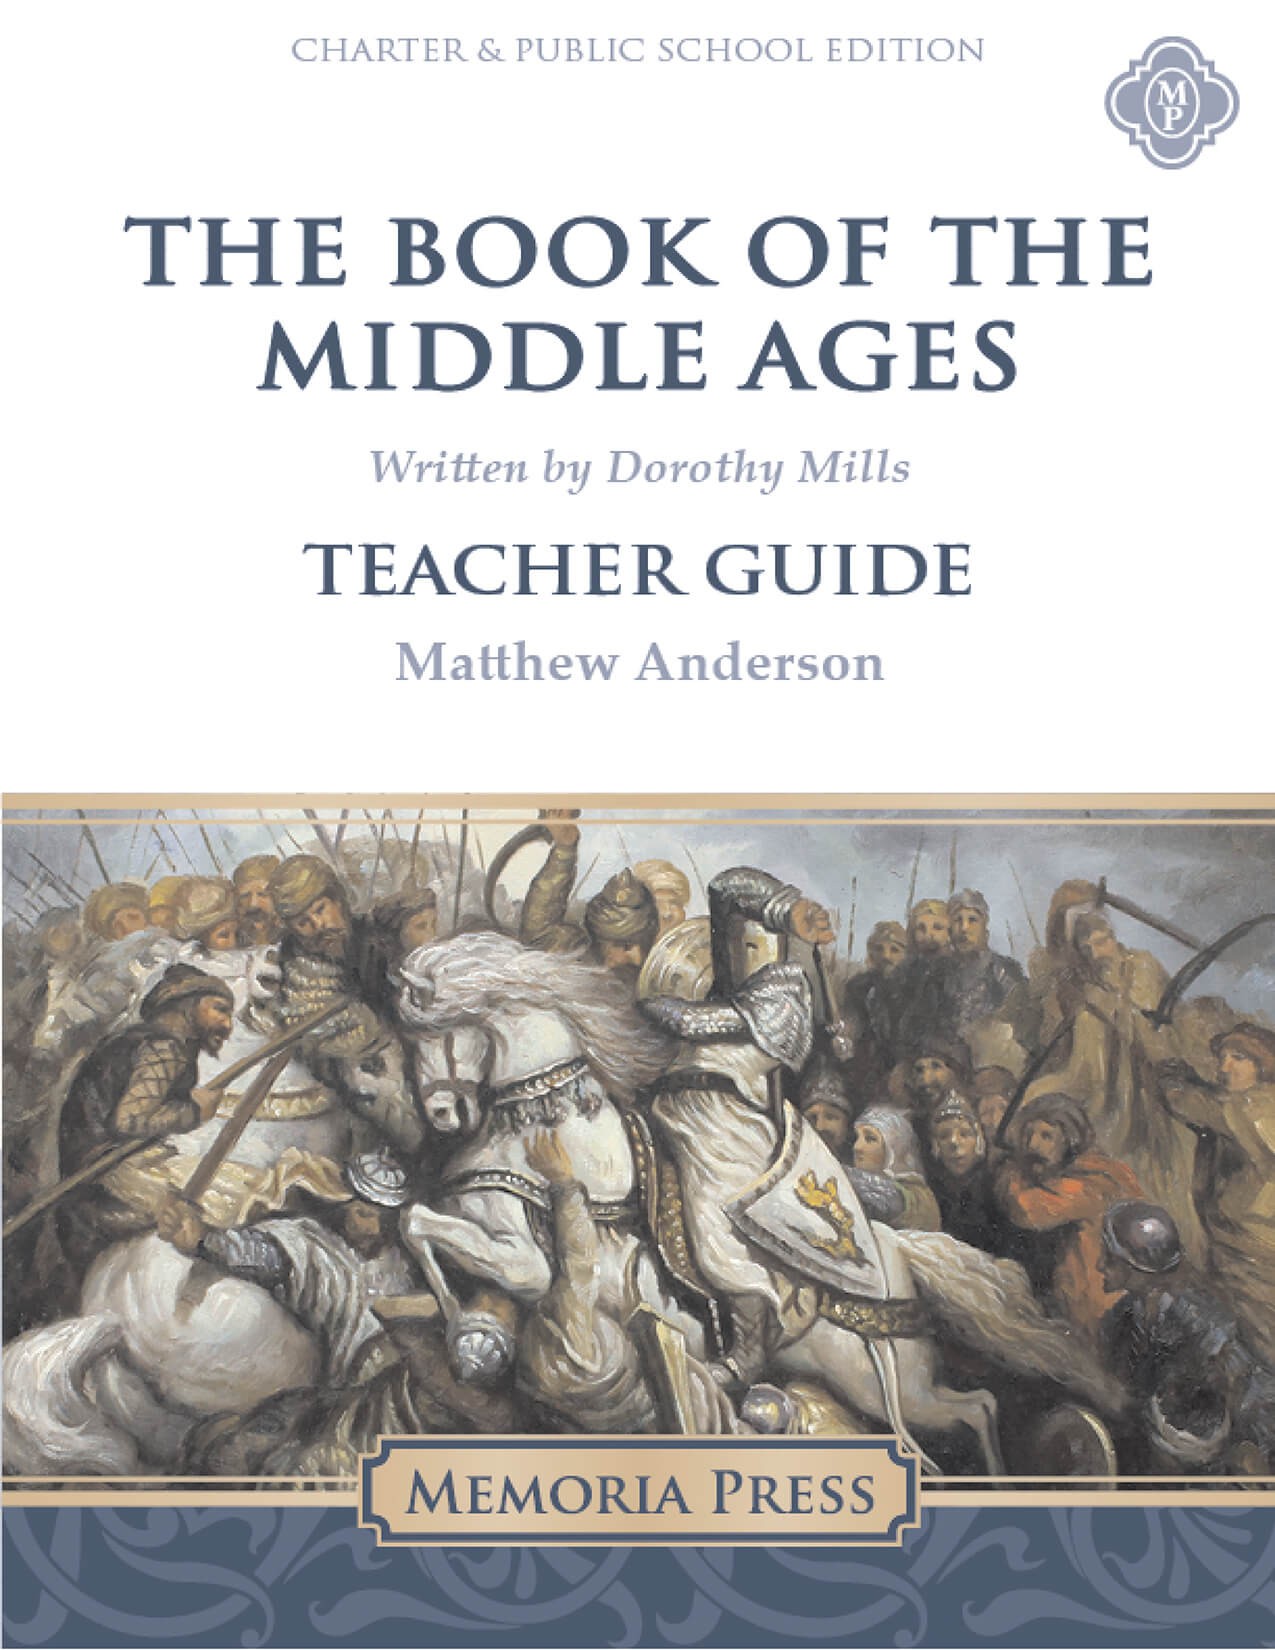 The Book of the Middle Ages Teacher Guide-Charter/Public Edition